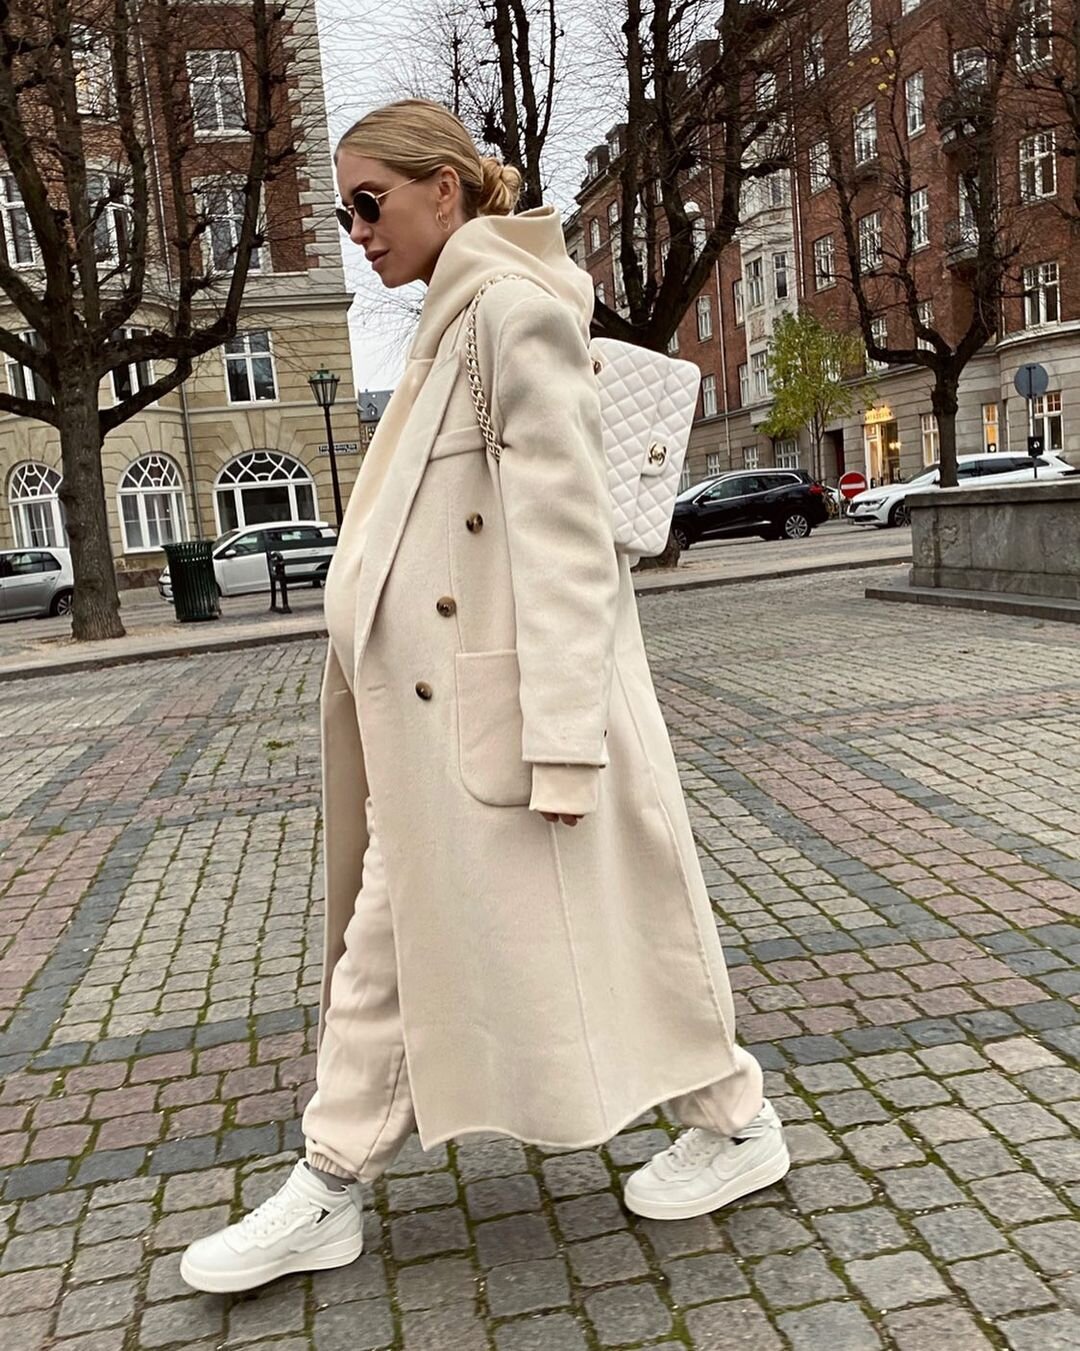 metan læsning Daggry Stay Cozy in These Casual Winter Outfits with Sneakers — ZEITGEIST